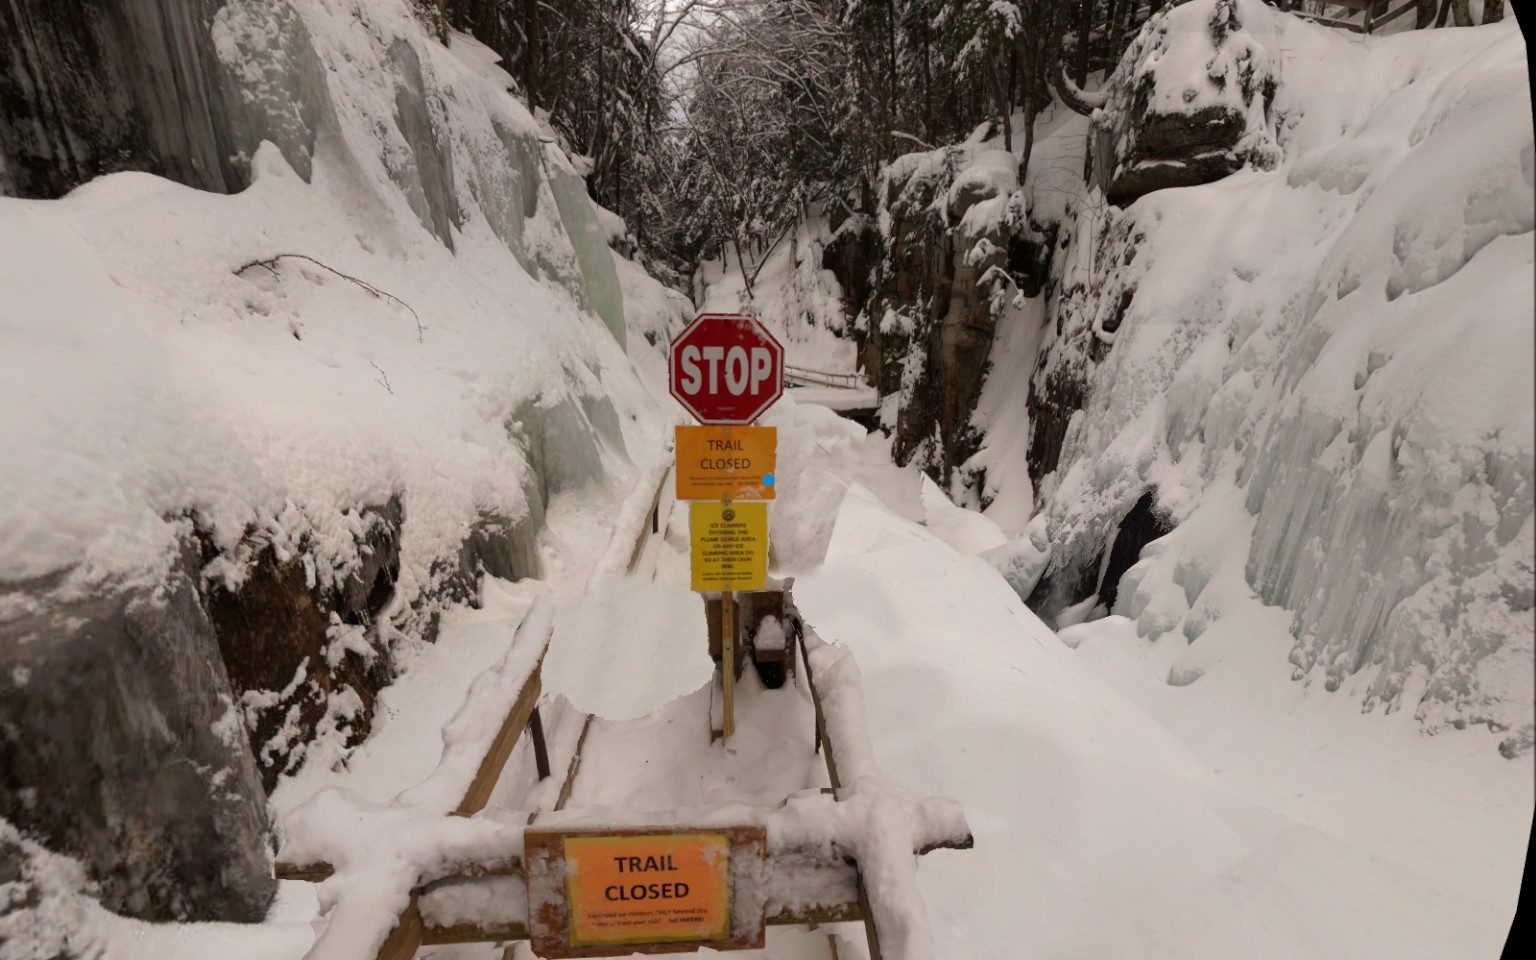 Image of a snow and ice covered bridge with a STOP sign and "Trail Closed" sign